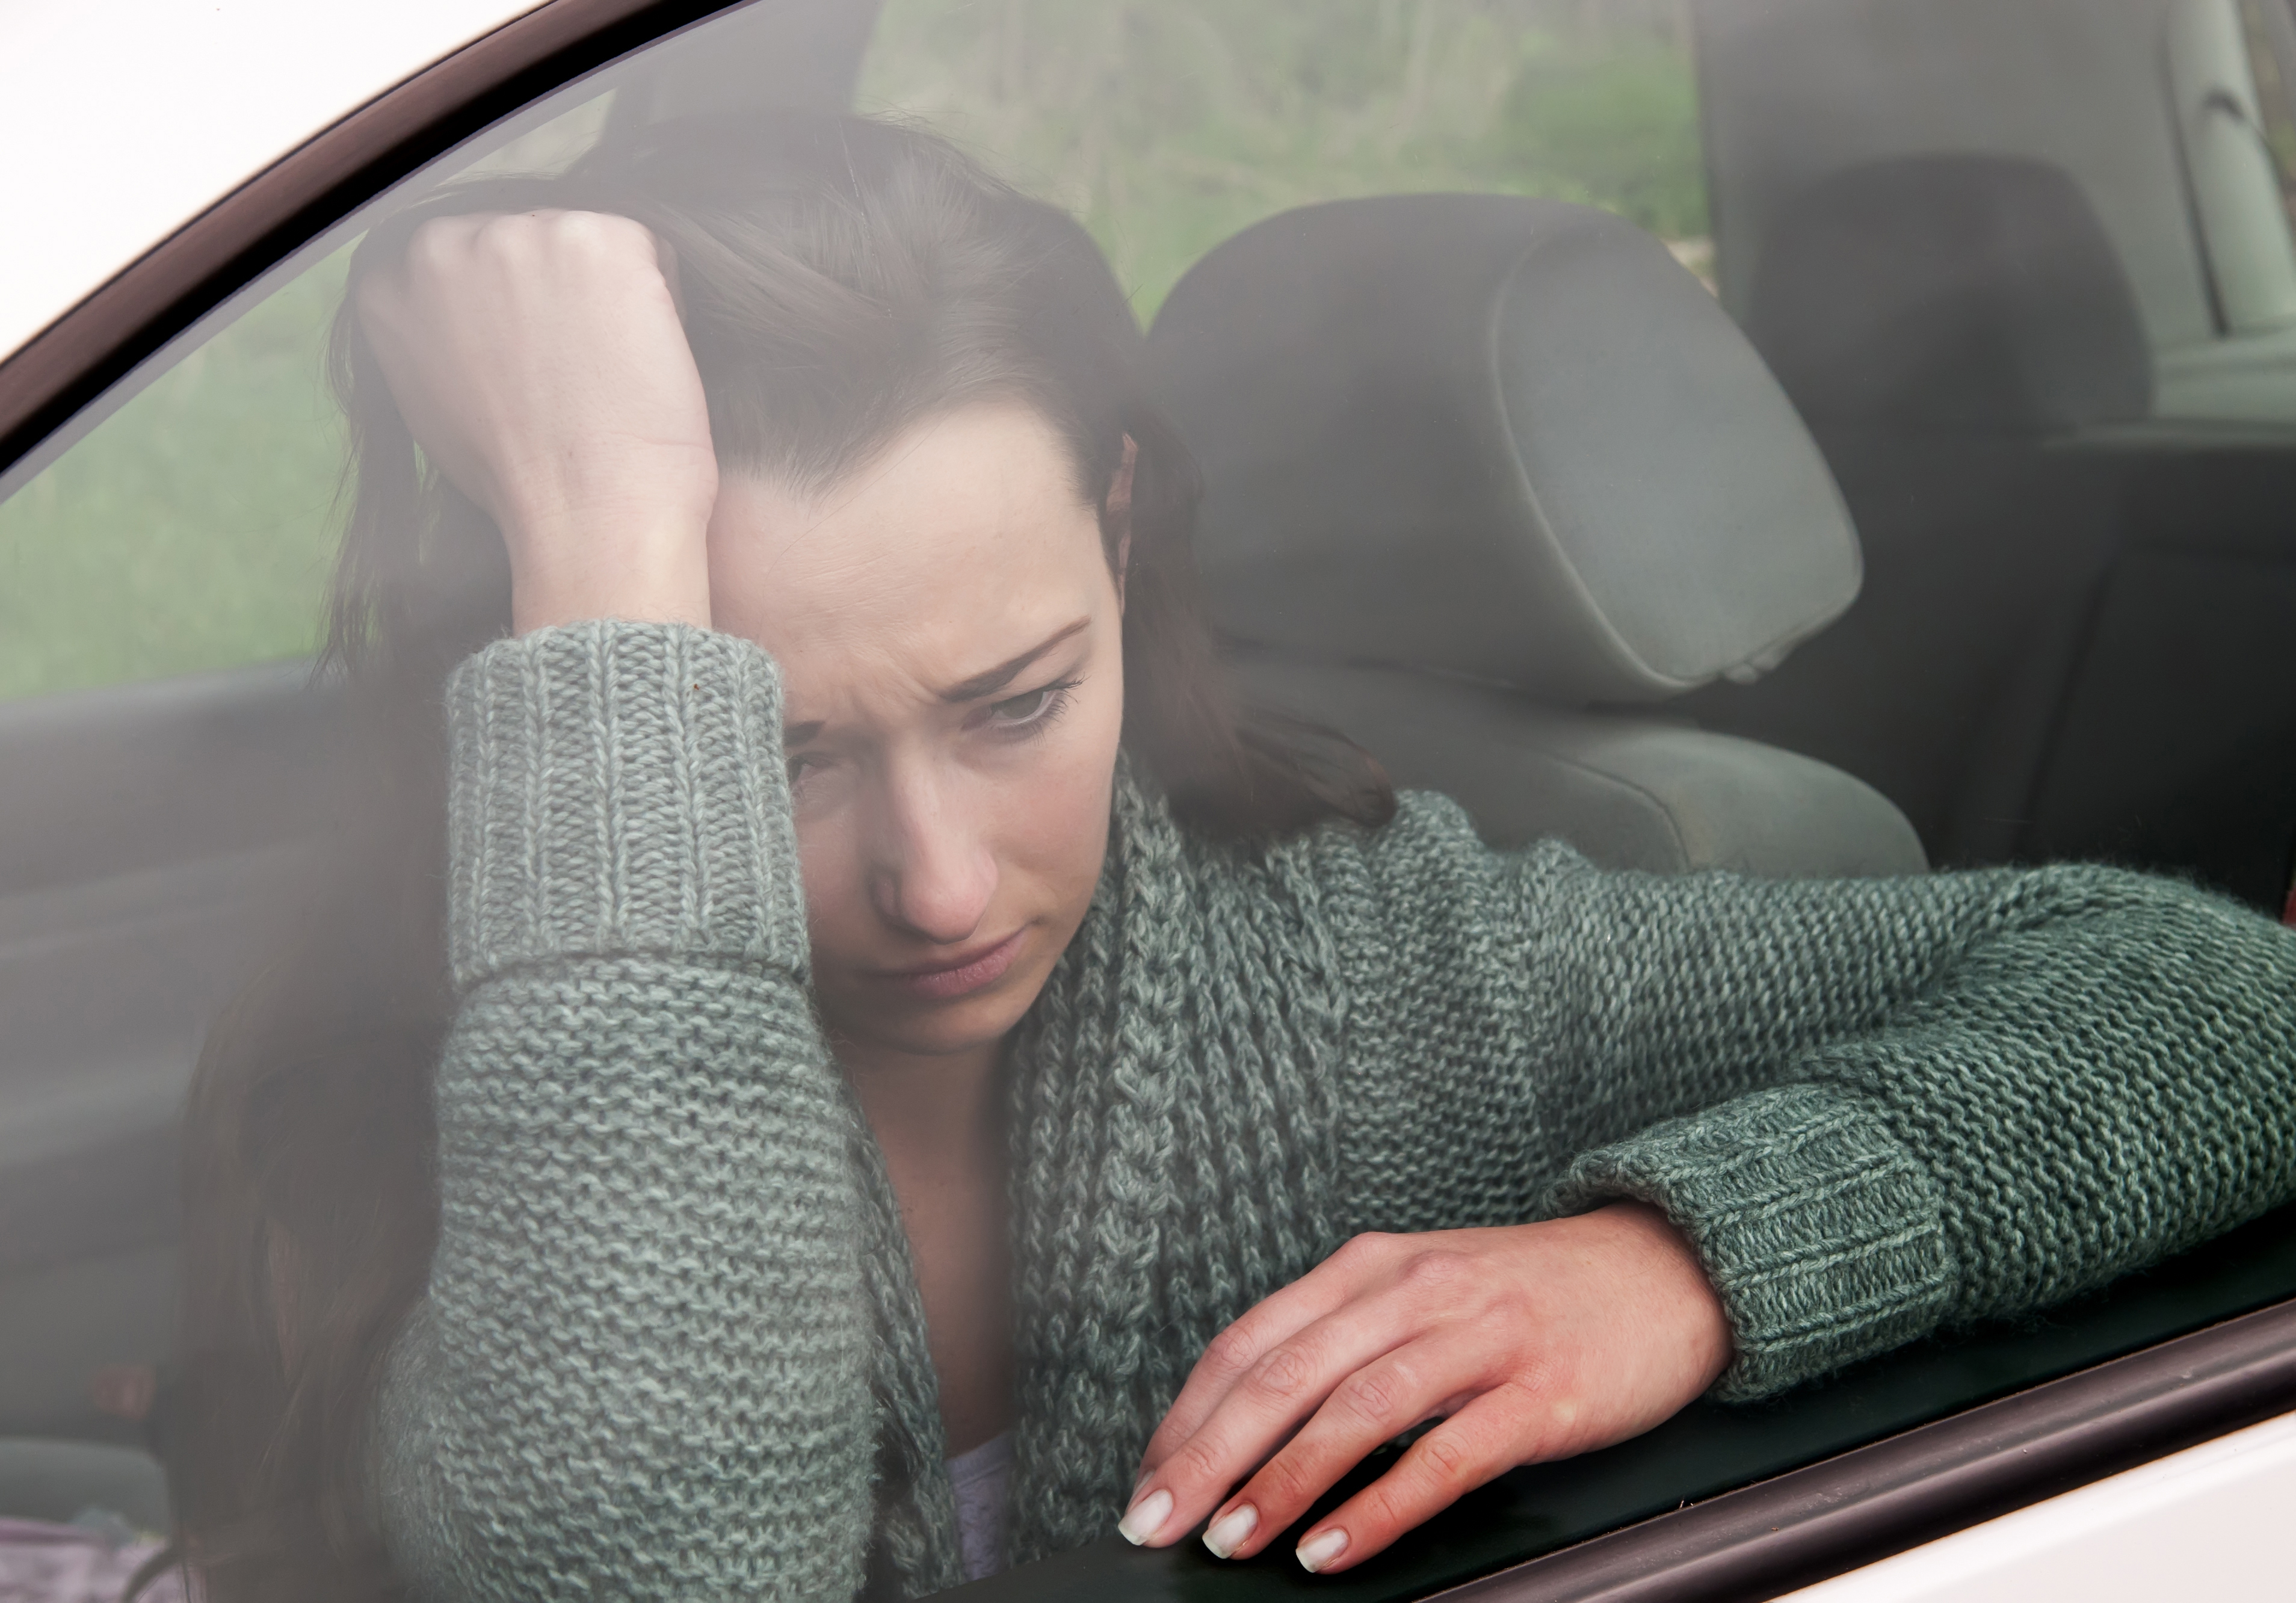 Sad young woman in the car | Source: Shutterstock